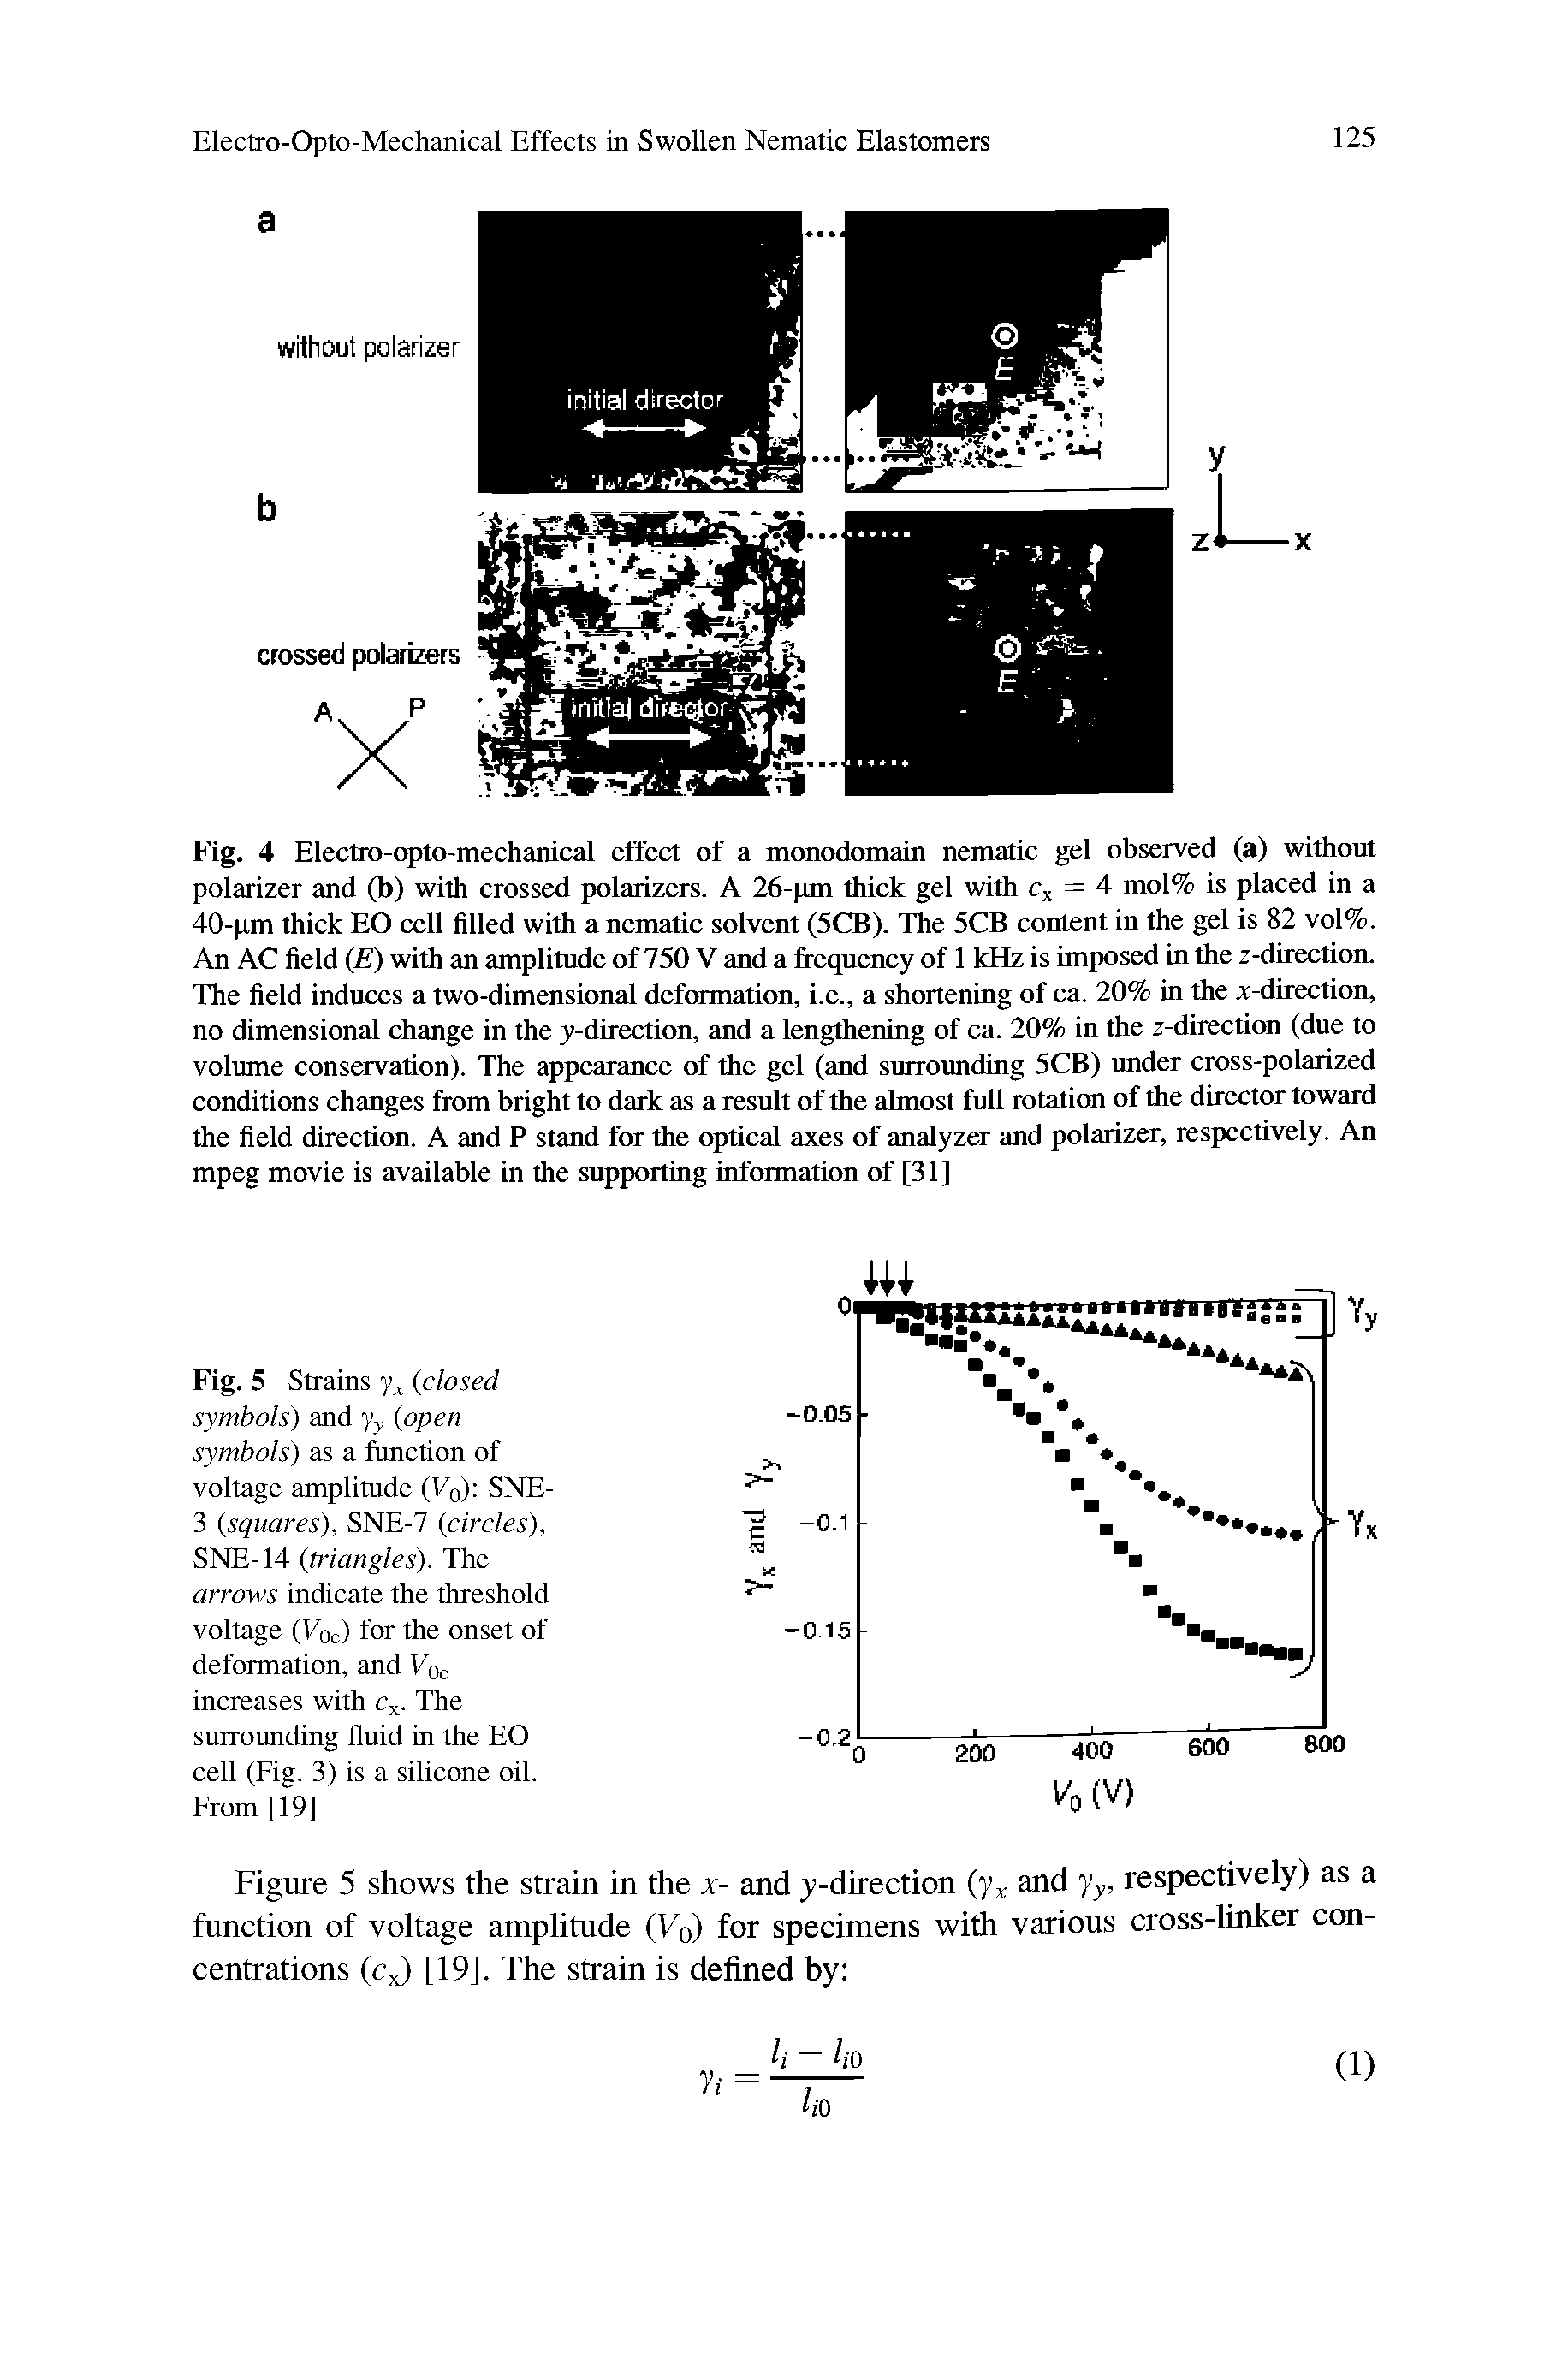 Fig. 4 Electro-opto-mechanical effect of a monodomain nematic gel observed (a) without polarizer and (b) with crossed polarizers. A 26-pm thick gel with = 4 mol% is placed in a 40-pm thick EO cell filled with a nematic solvent (5CB). The 5CB content in the gel is 82 vol%. An AC field (E) with an amplitude of 750 V and a fi equency of 1 kHz is imposed in the z-direcUon. The field induces a two-dimensional deformation, i.e., a shortening of ca. 20% in the r-direction, no dimensional change in the y-direction, and a lengthening of ca. 20% in the z-direction (due to volume conservation). The appearance of the gel (and surrounding 5CB) under cross-polarized conditions changes from bright to dark as a result of the almost full rotatirai of the director toward the field direction. A and P stand for the optical axes of analyzCT and polarizer, respectively. An mpeg movie is available in the supporting information of [31]...